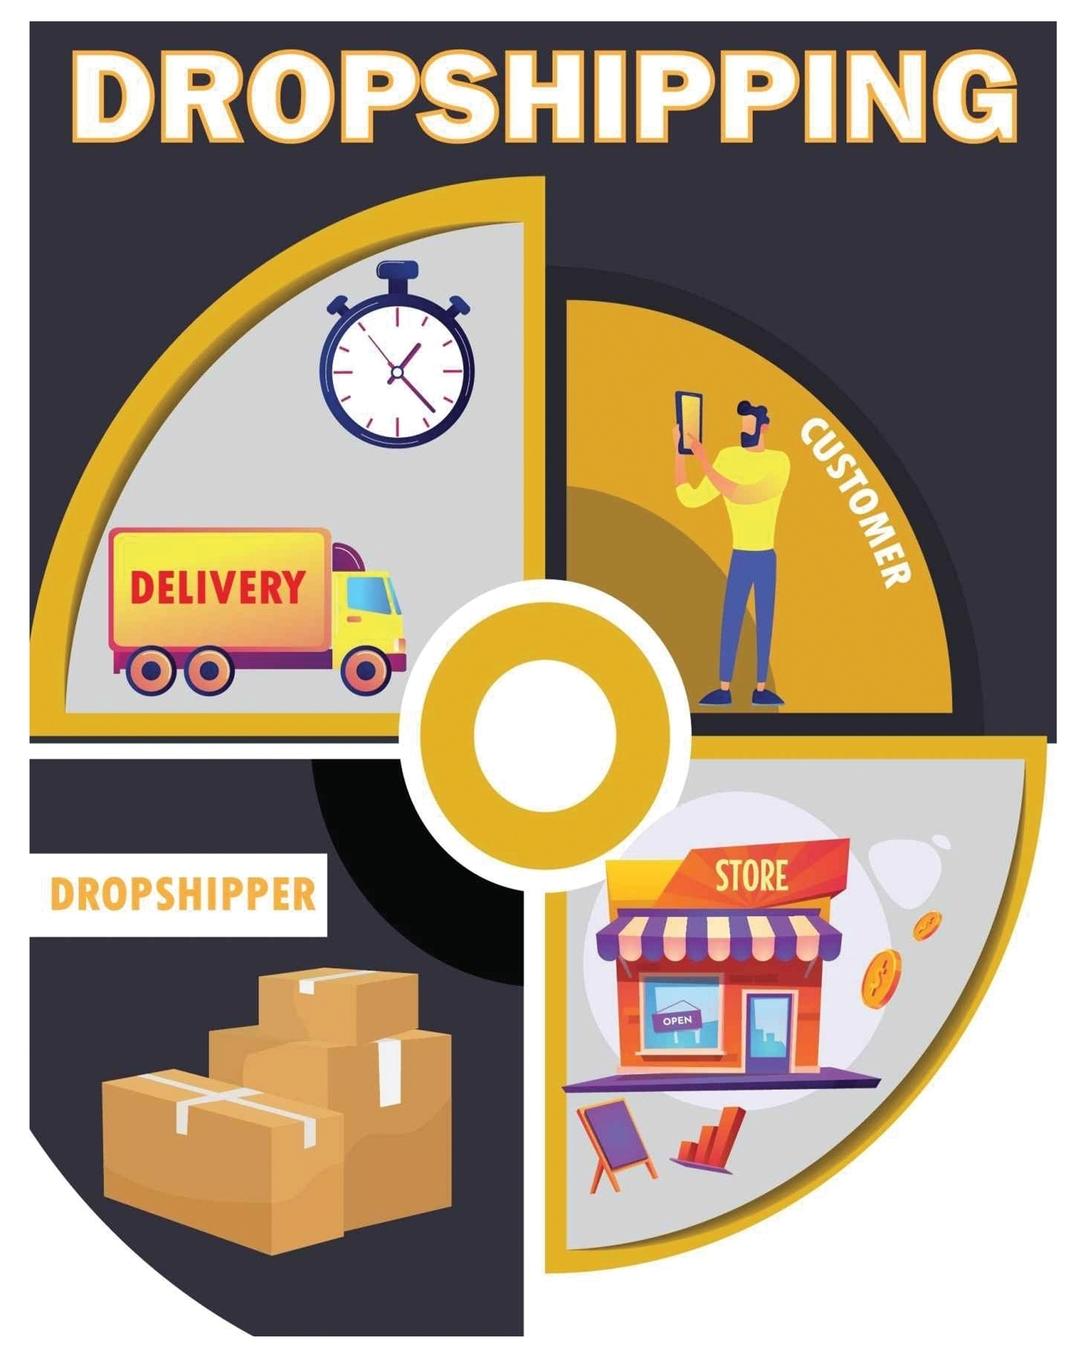 Book DROPSHIPPING E-Commerce Business Model 2022 